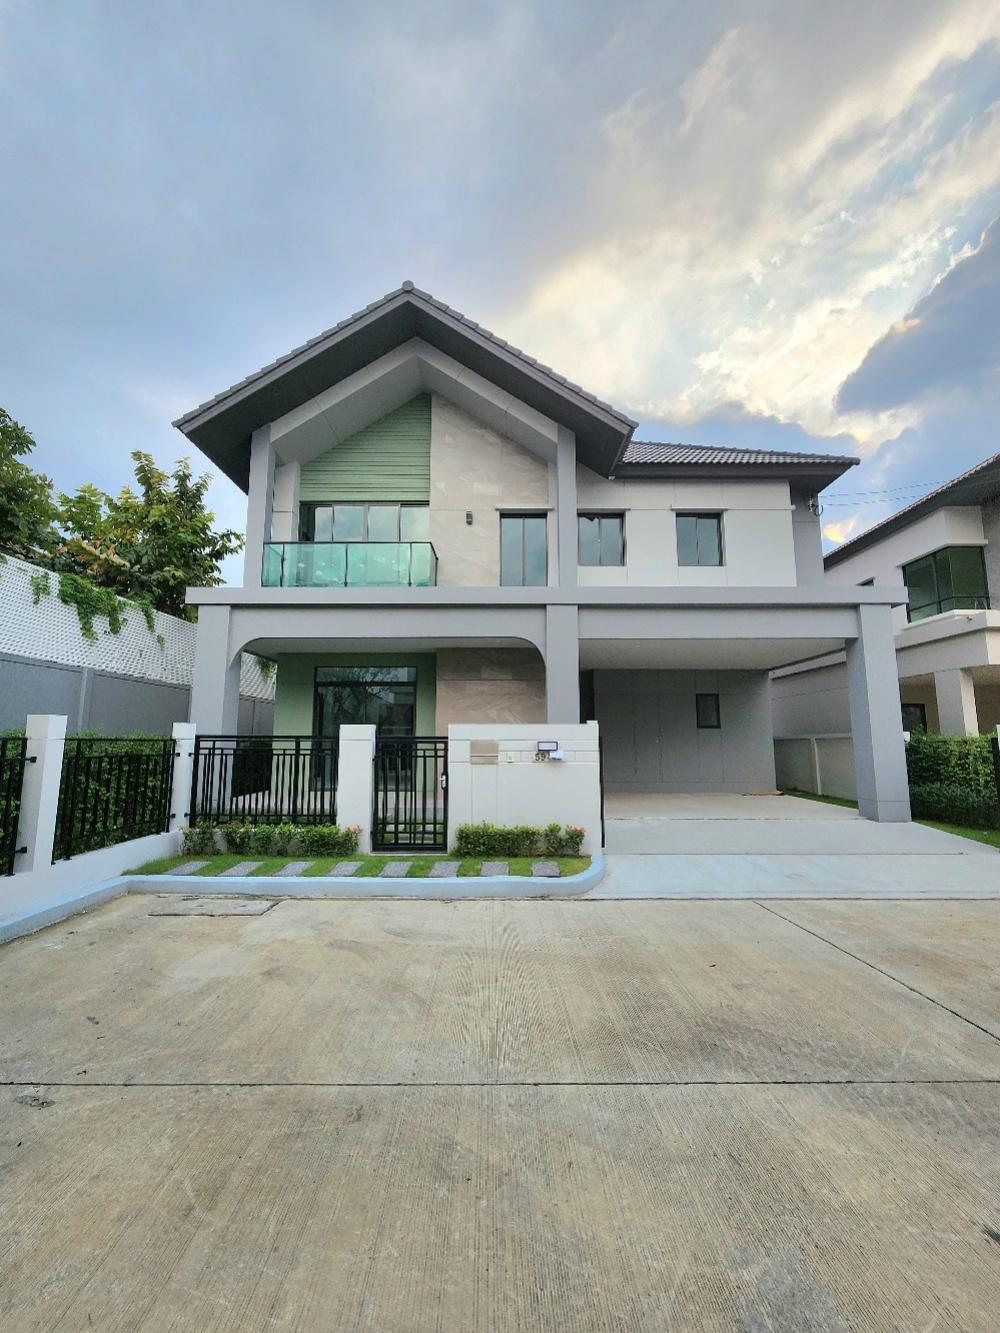 For SaleHouseRama5, Ratchapruek, Bangkruai : 100% new house for sale, behind the corner, with a garden in front of the house, quality society, safe, luxurious, stylish, in a peaceful alley, there are only 4 houses, Bangkok Boulevard, Bangkok Boulevard, Rama 5 (still new)